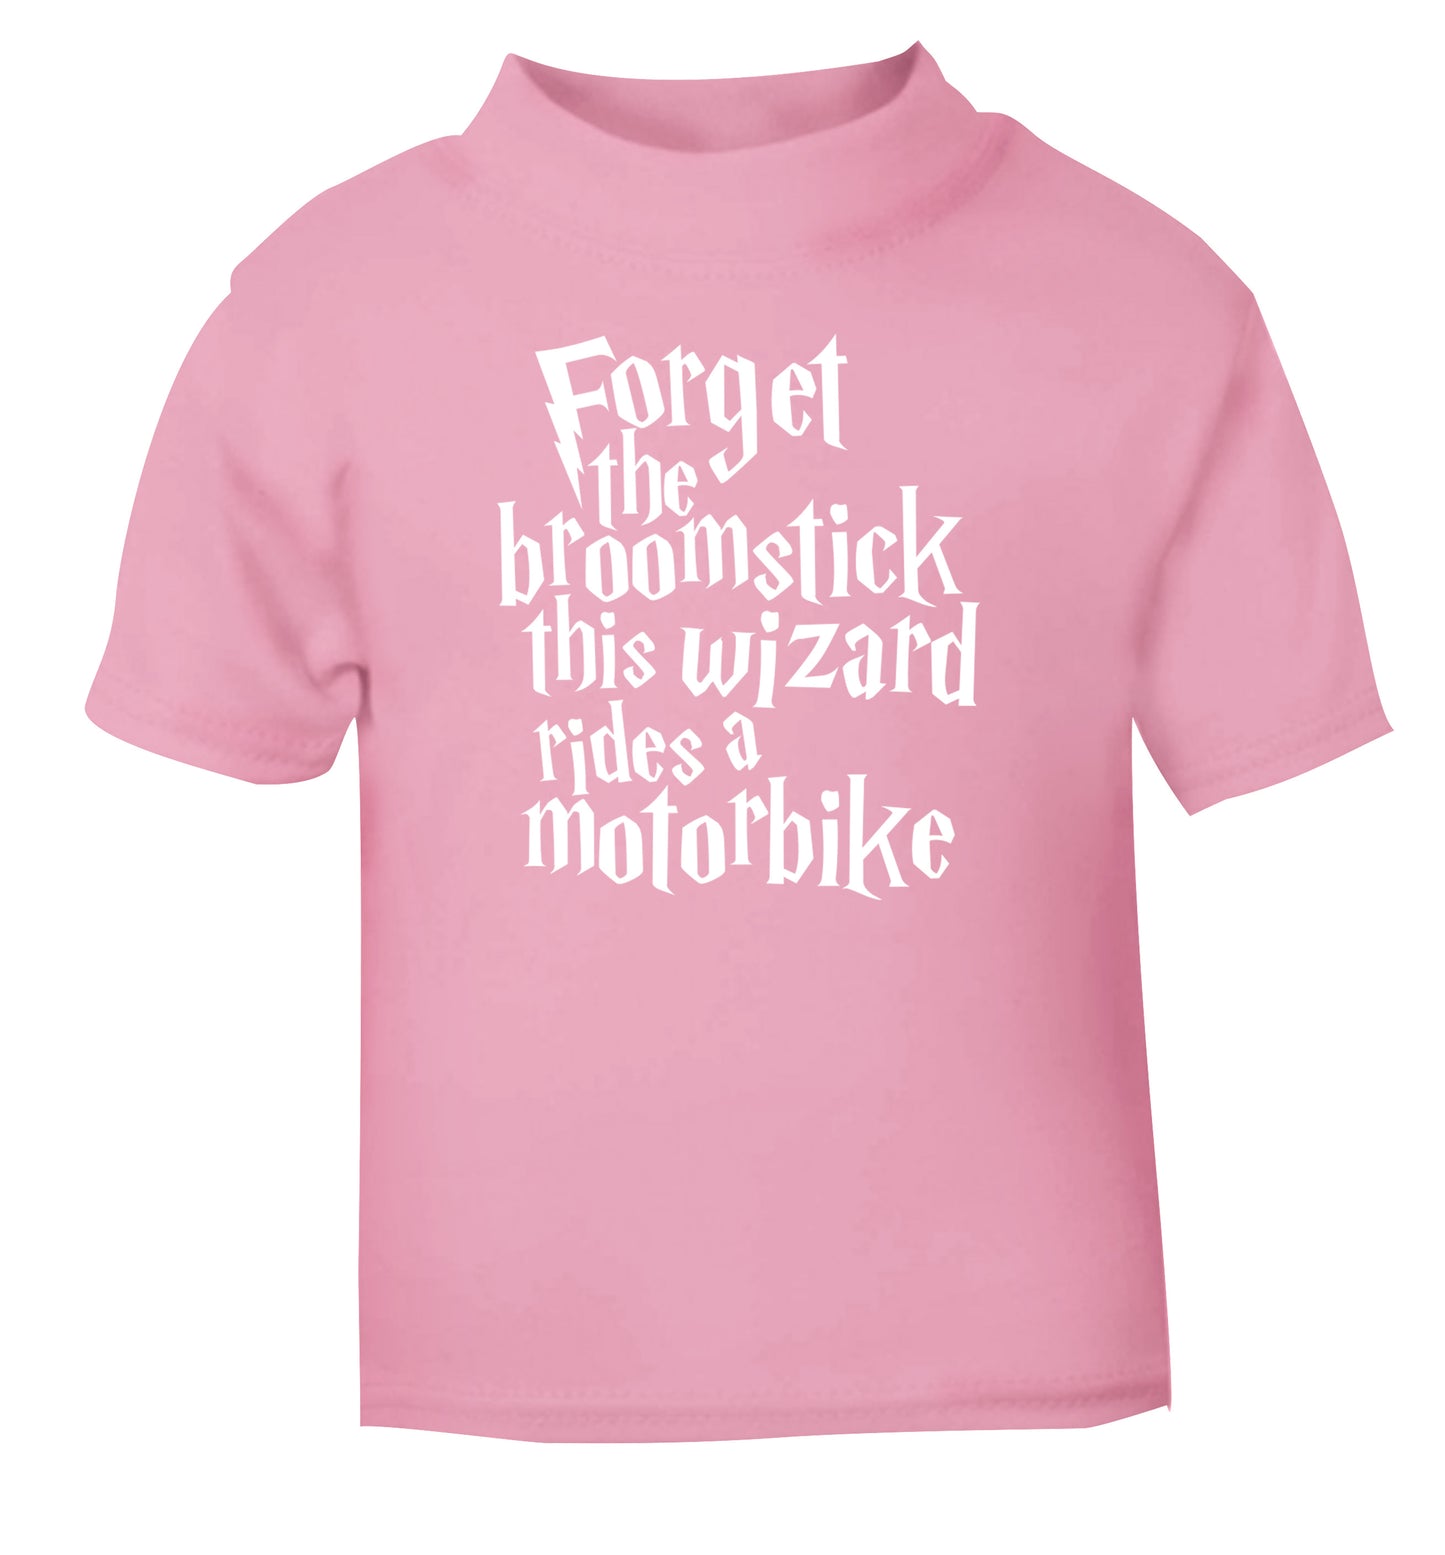 Forget the broomstick this wizard rides a motorbike light pink Baby Toddler Tshirt 2 Years